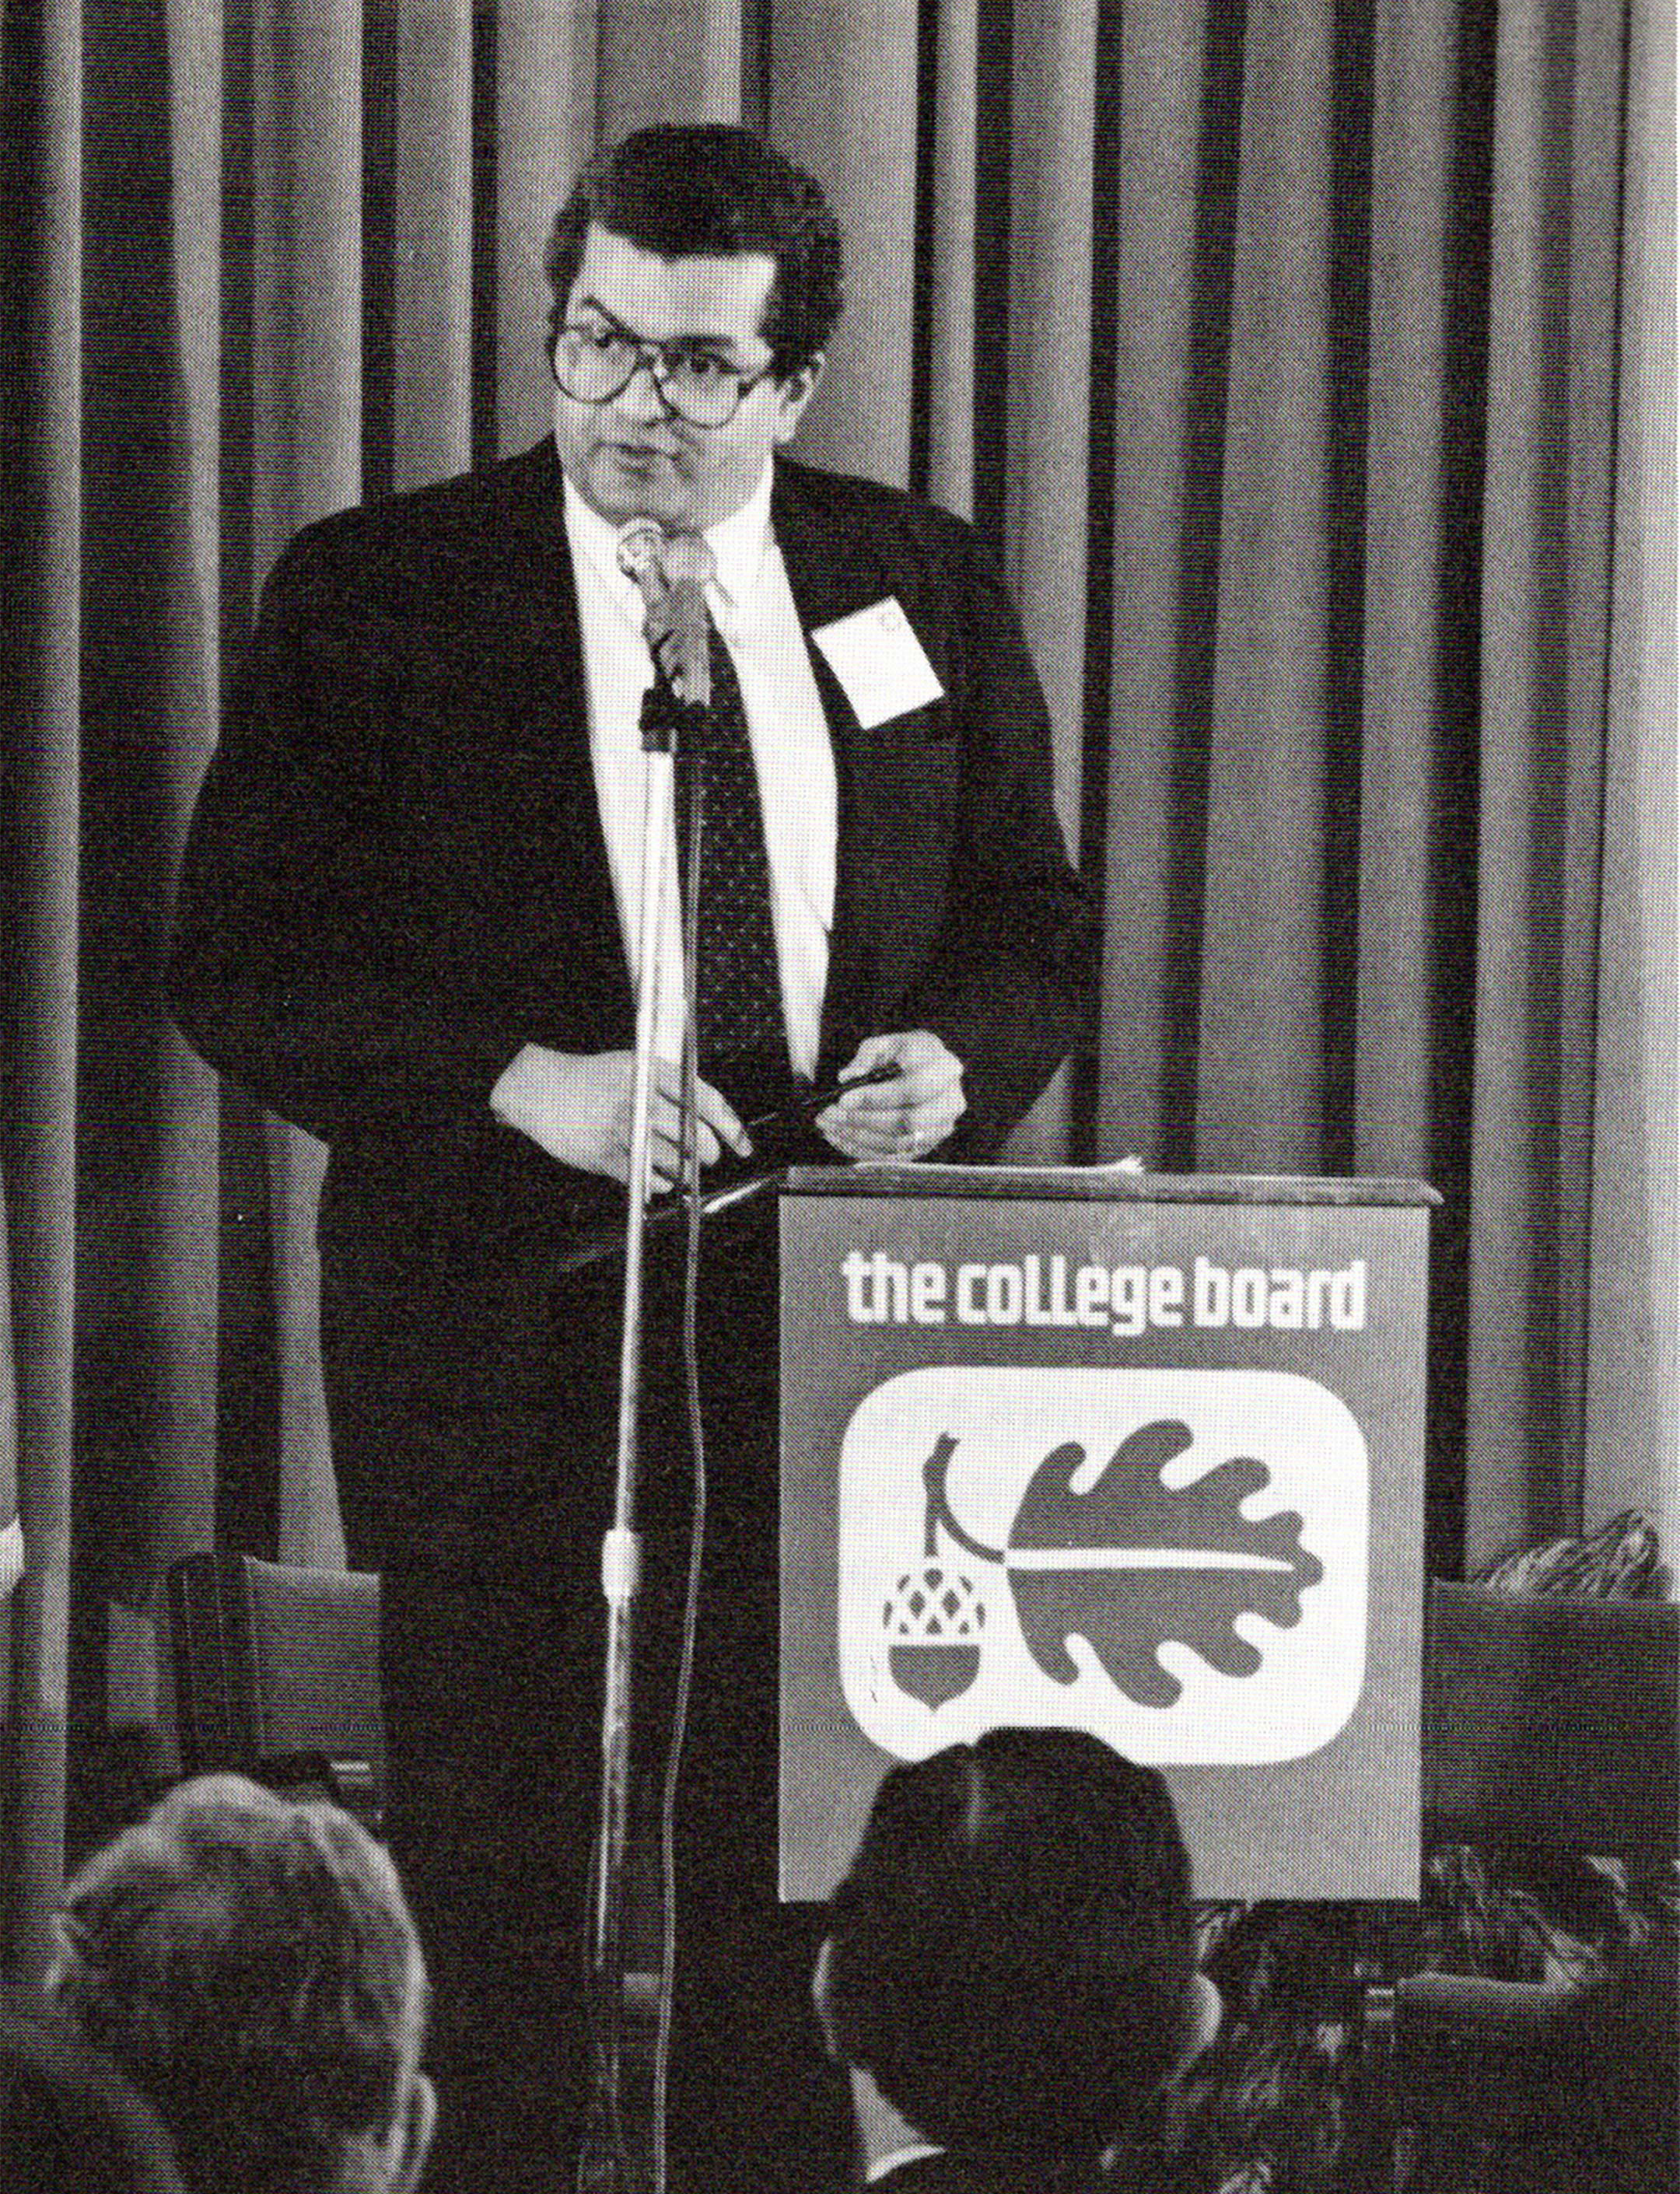 black and white photo of donald stewart, in glasses and a suit, talking to a group from a lectern with a college board logo on the front of it